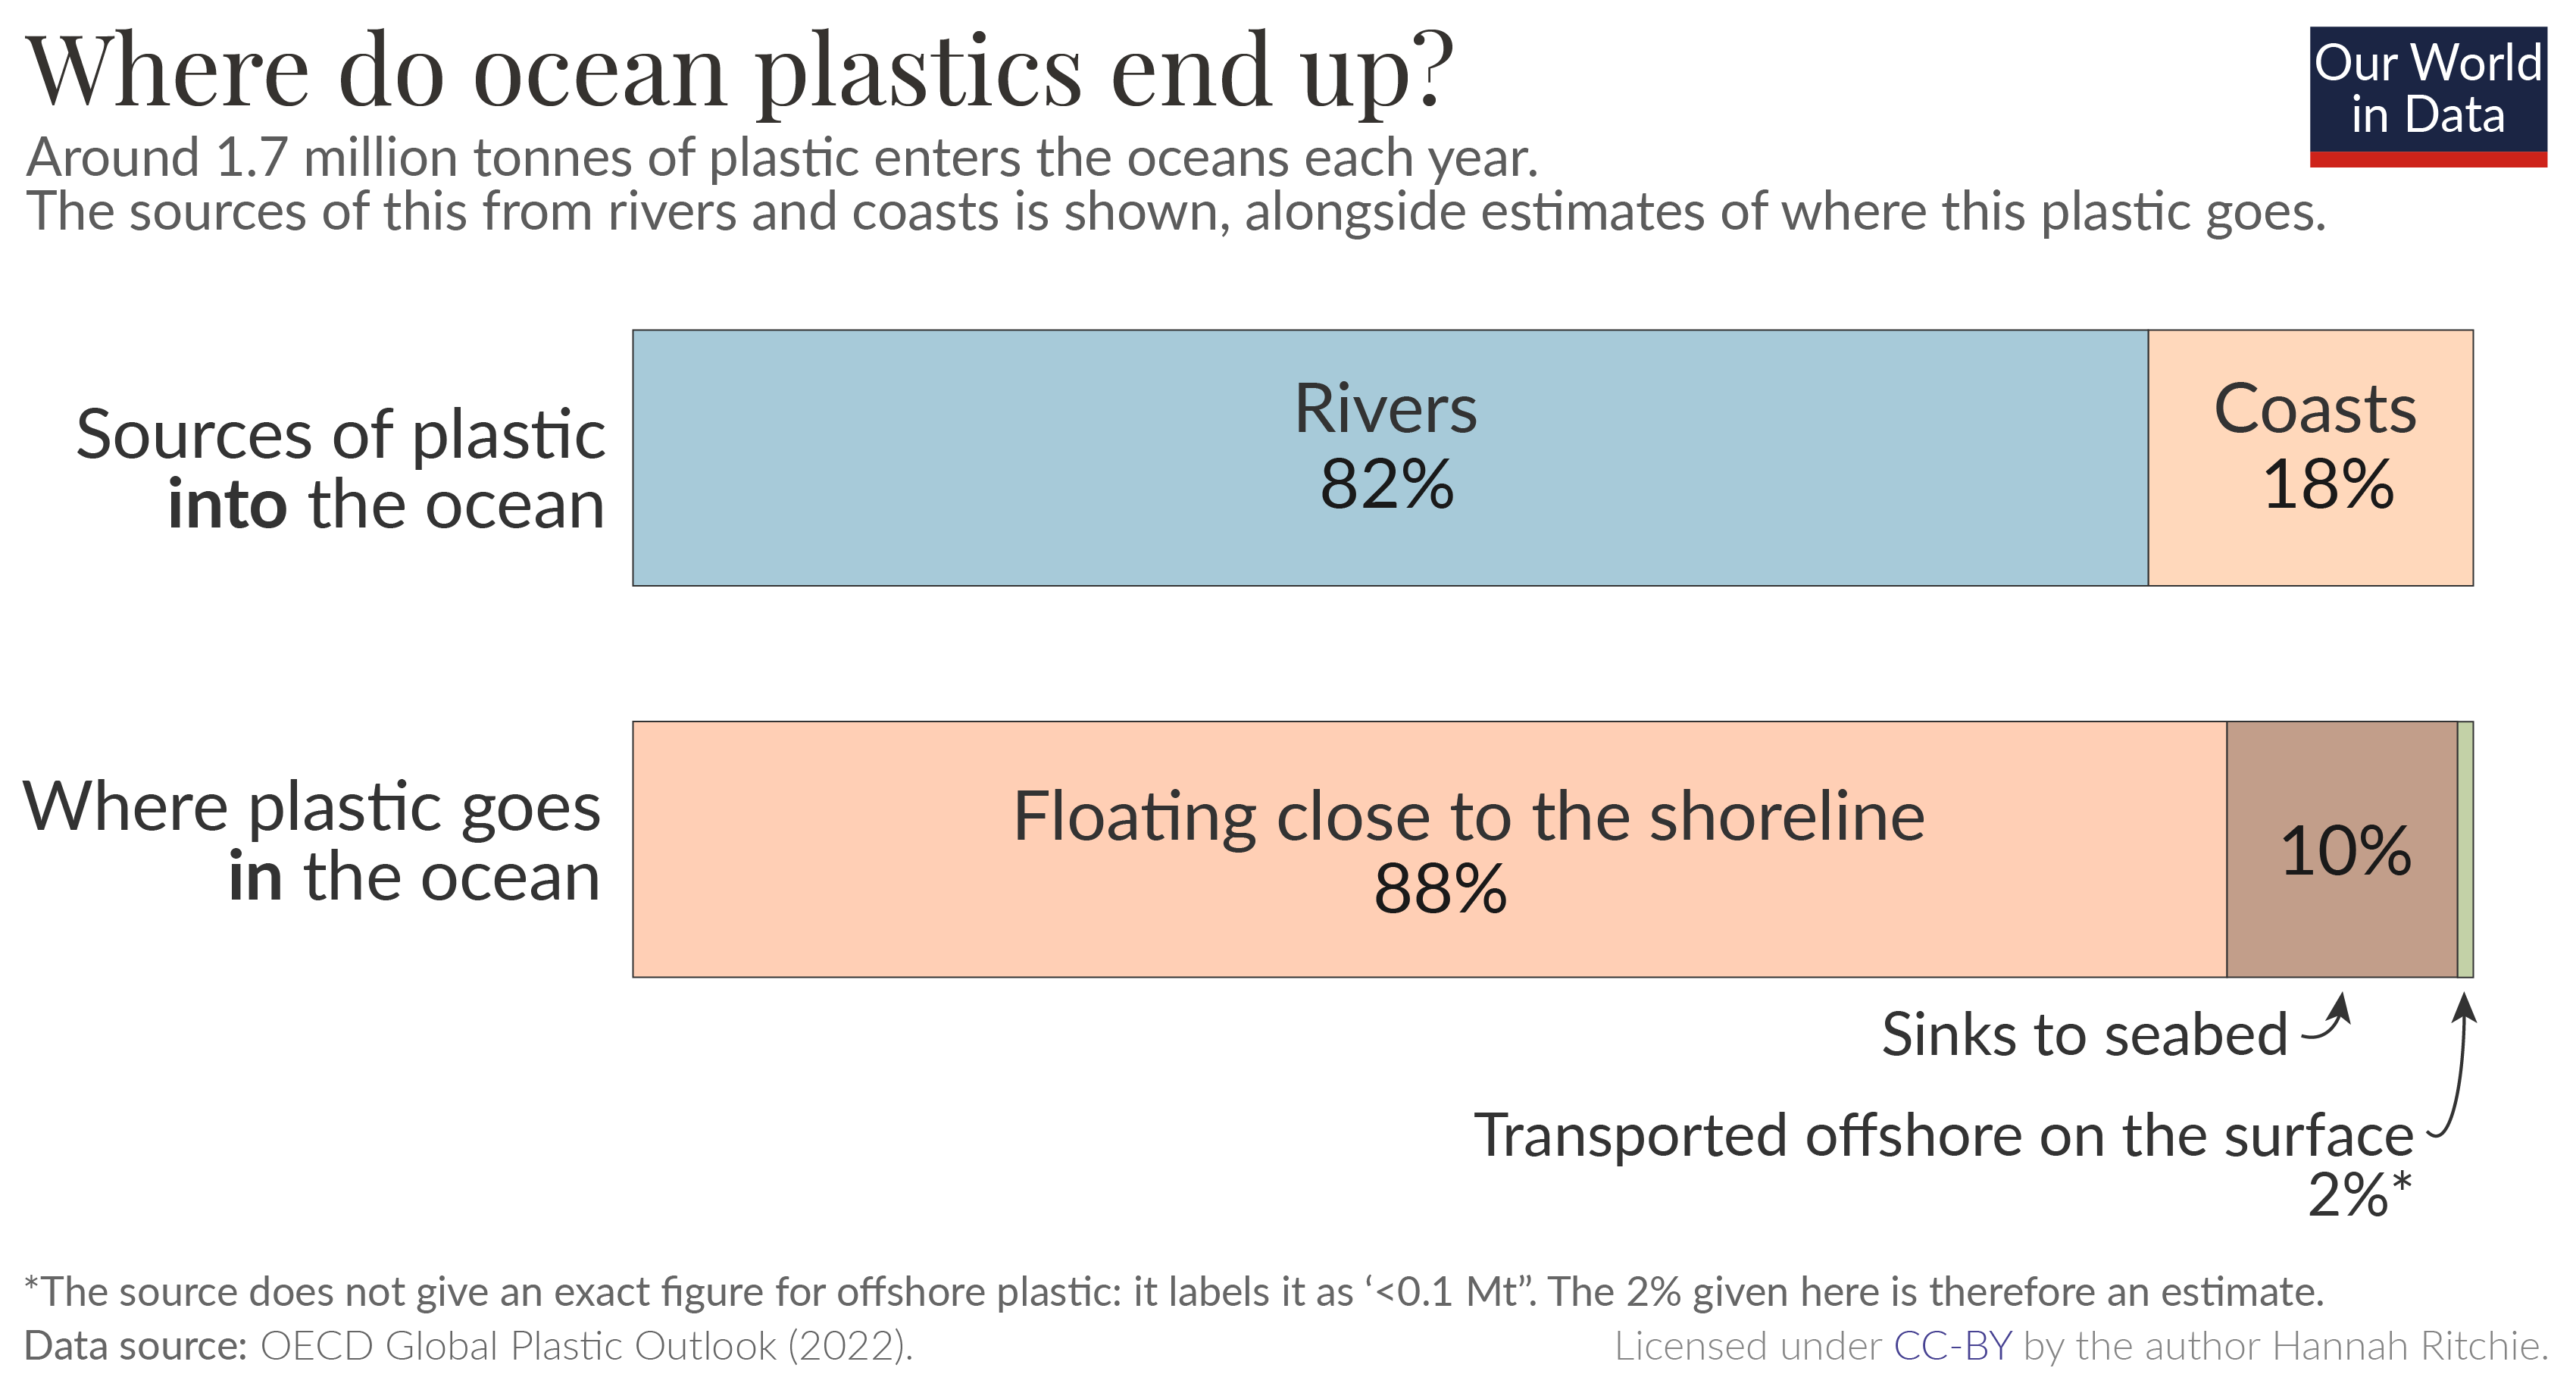 Stacked bar chart showing where plastic in the ocean goes. Most floats around coastlines, around 12% sinks to the seabed and only small amounts are transported offshore.